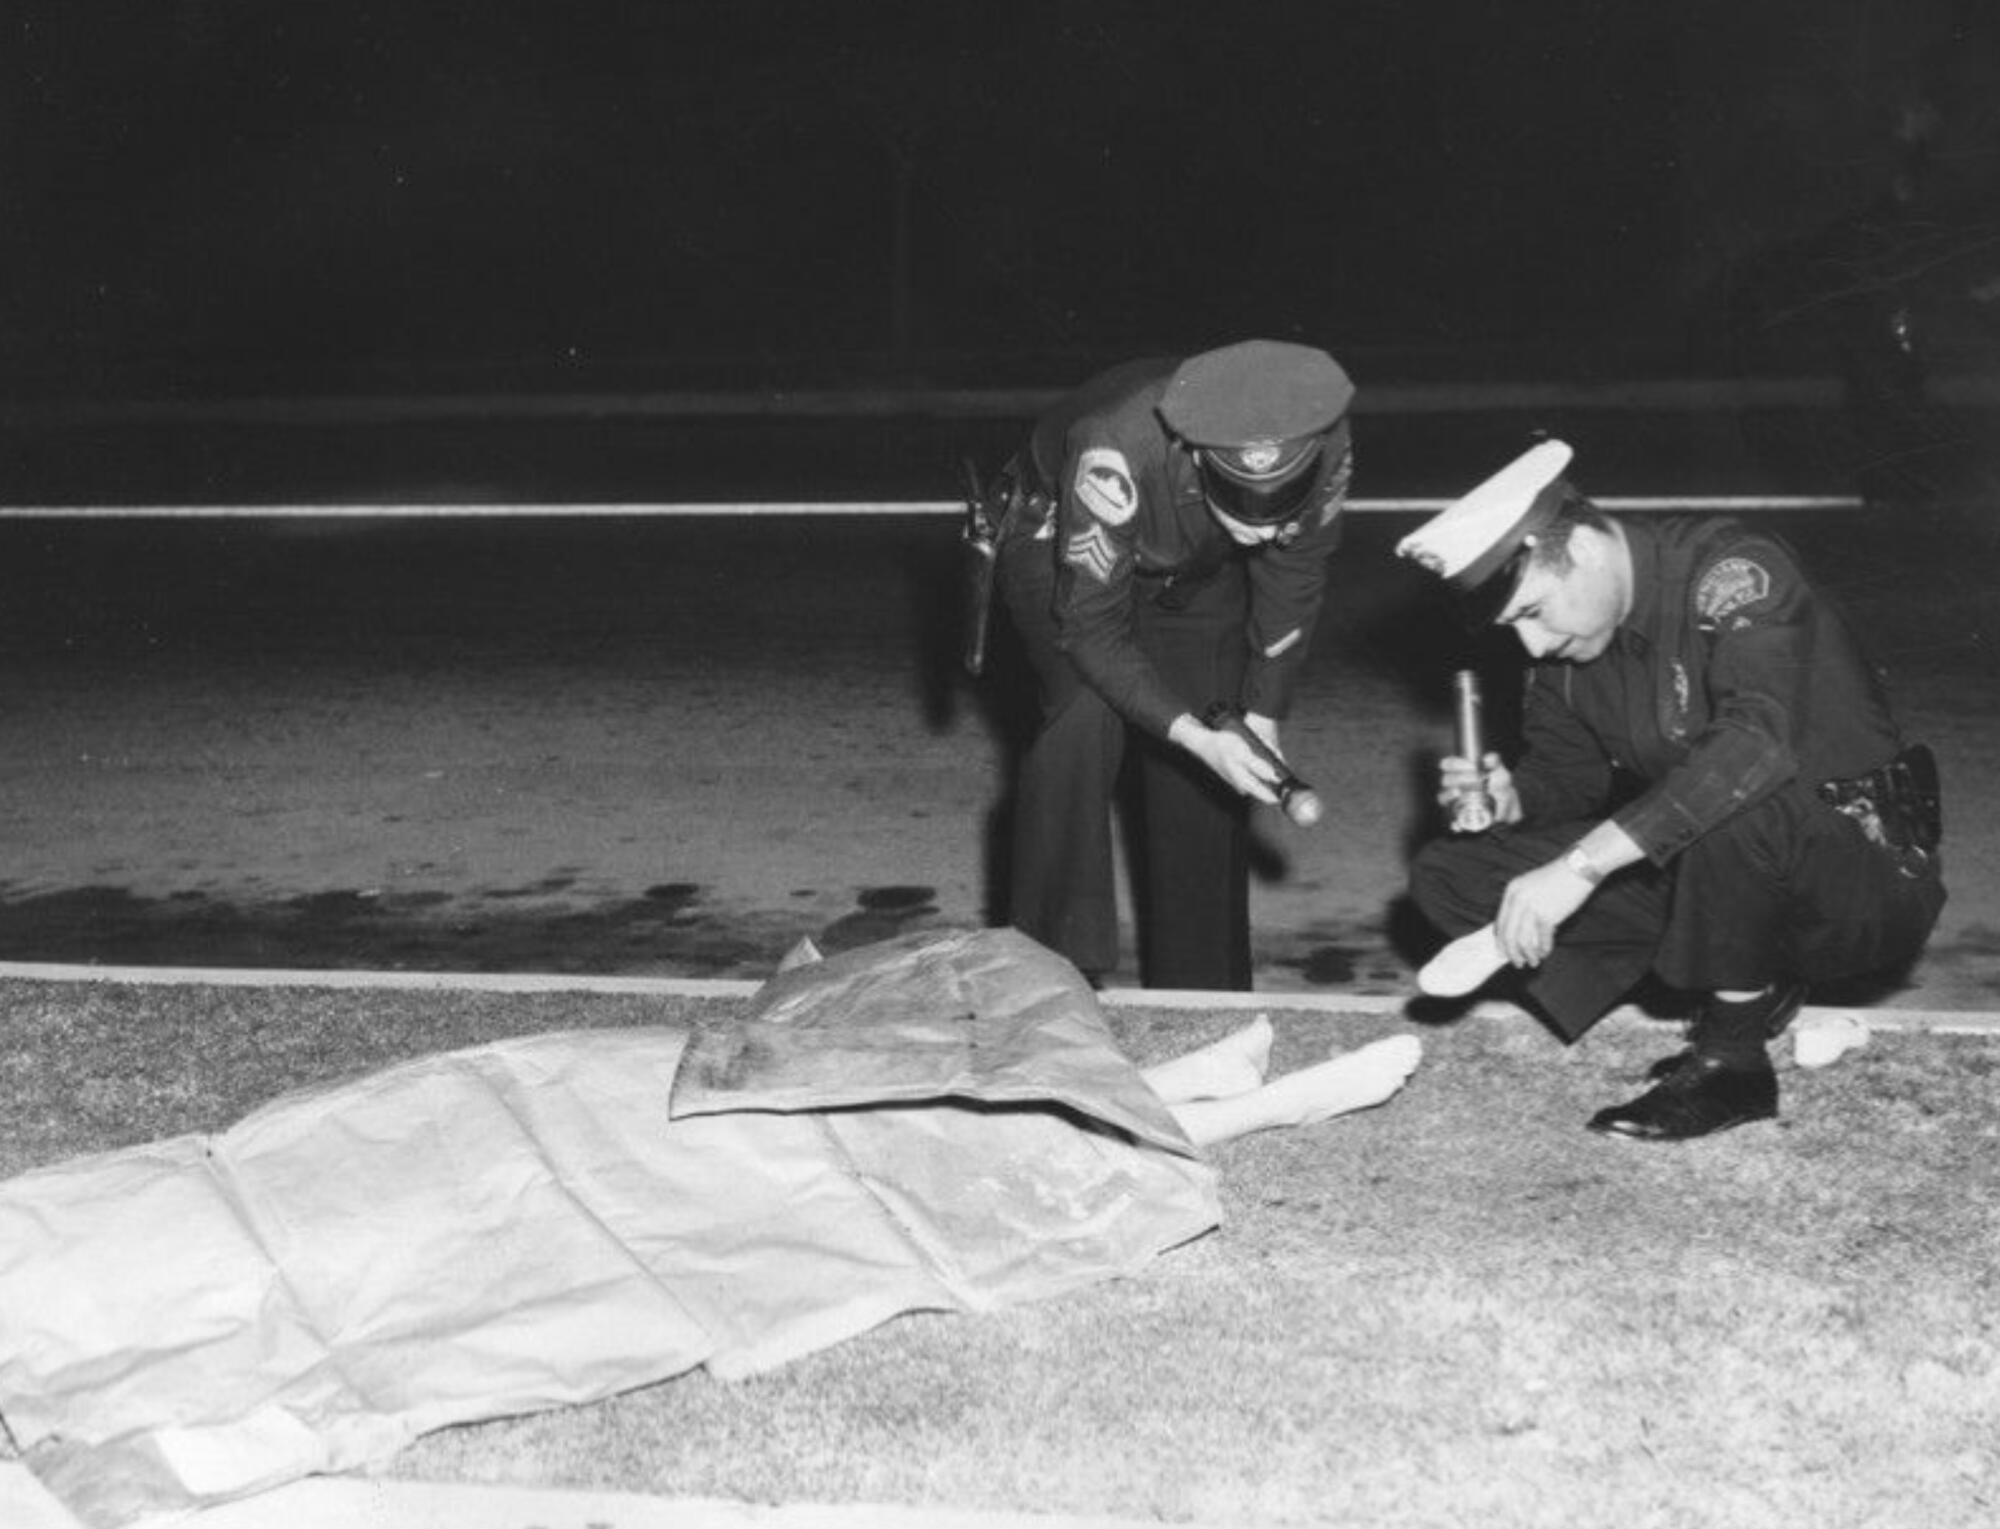 Two police officers inspecting a body on a grassy area outdoors. Most of her body is covered by cloth but her feet visible.